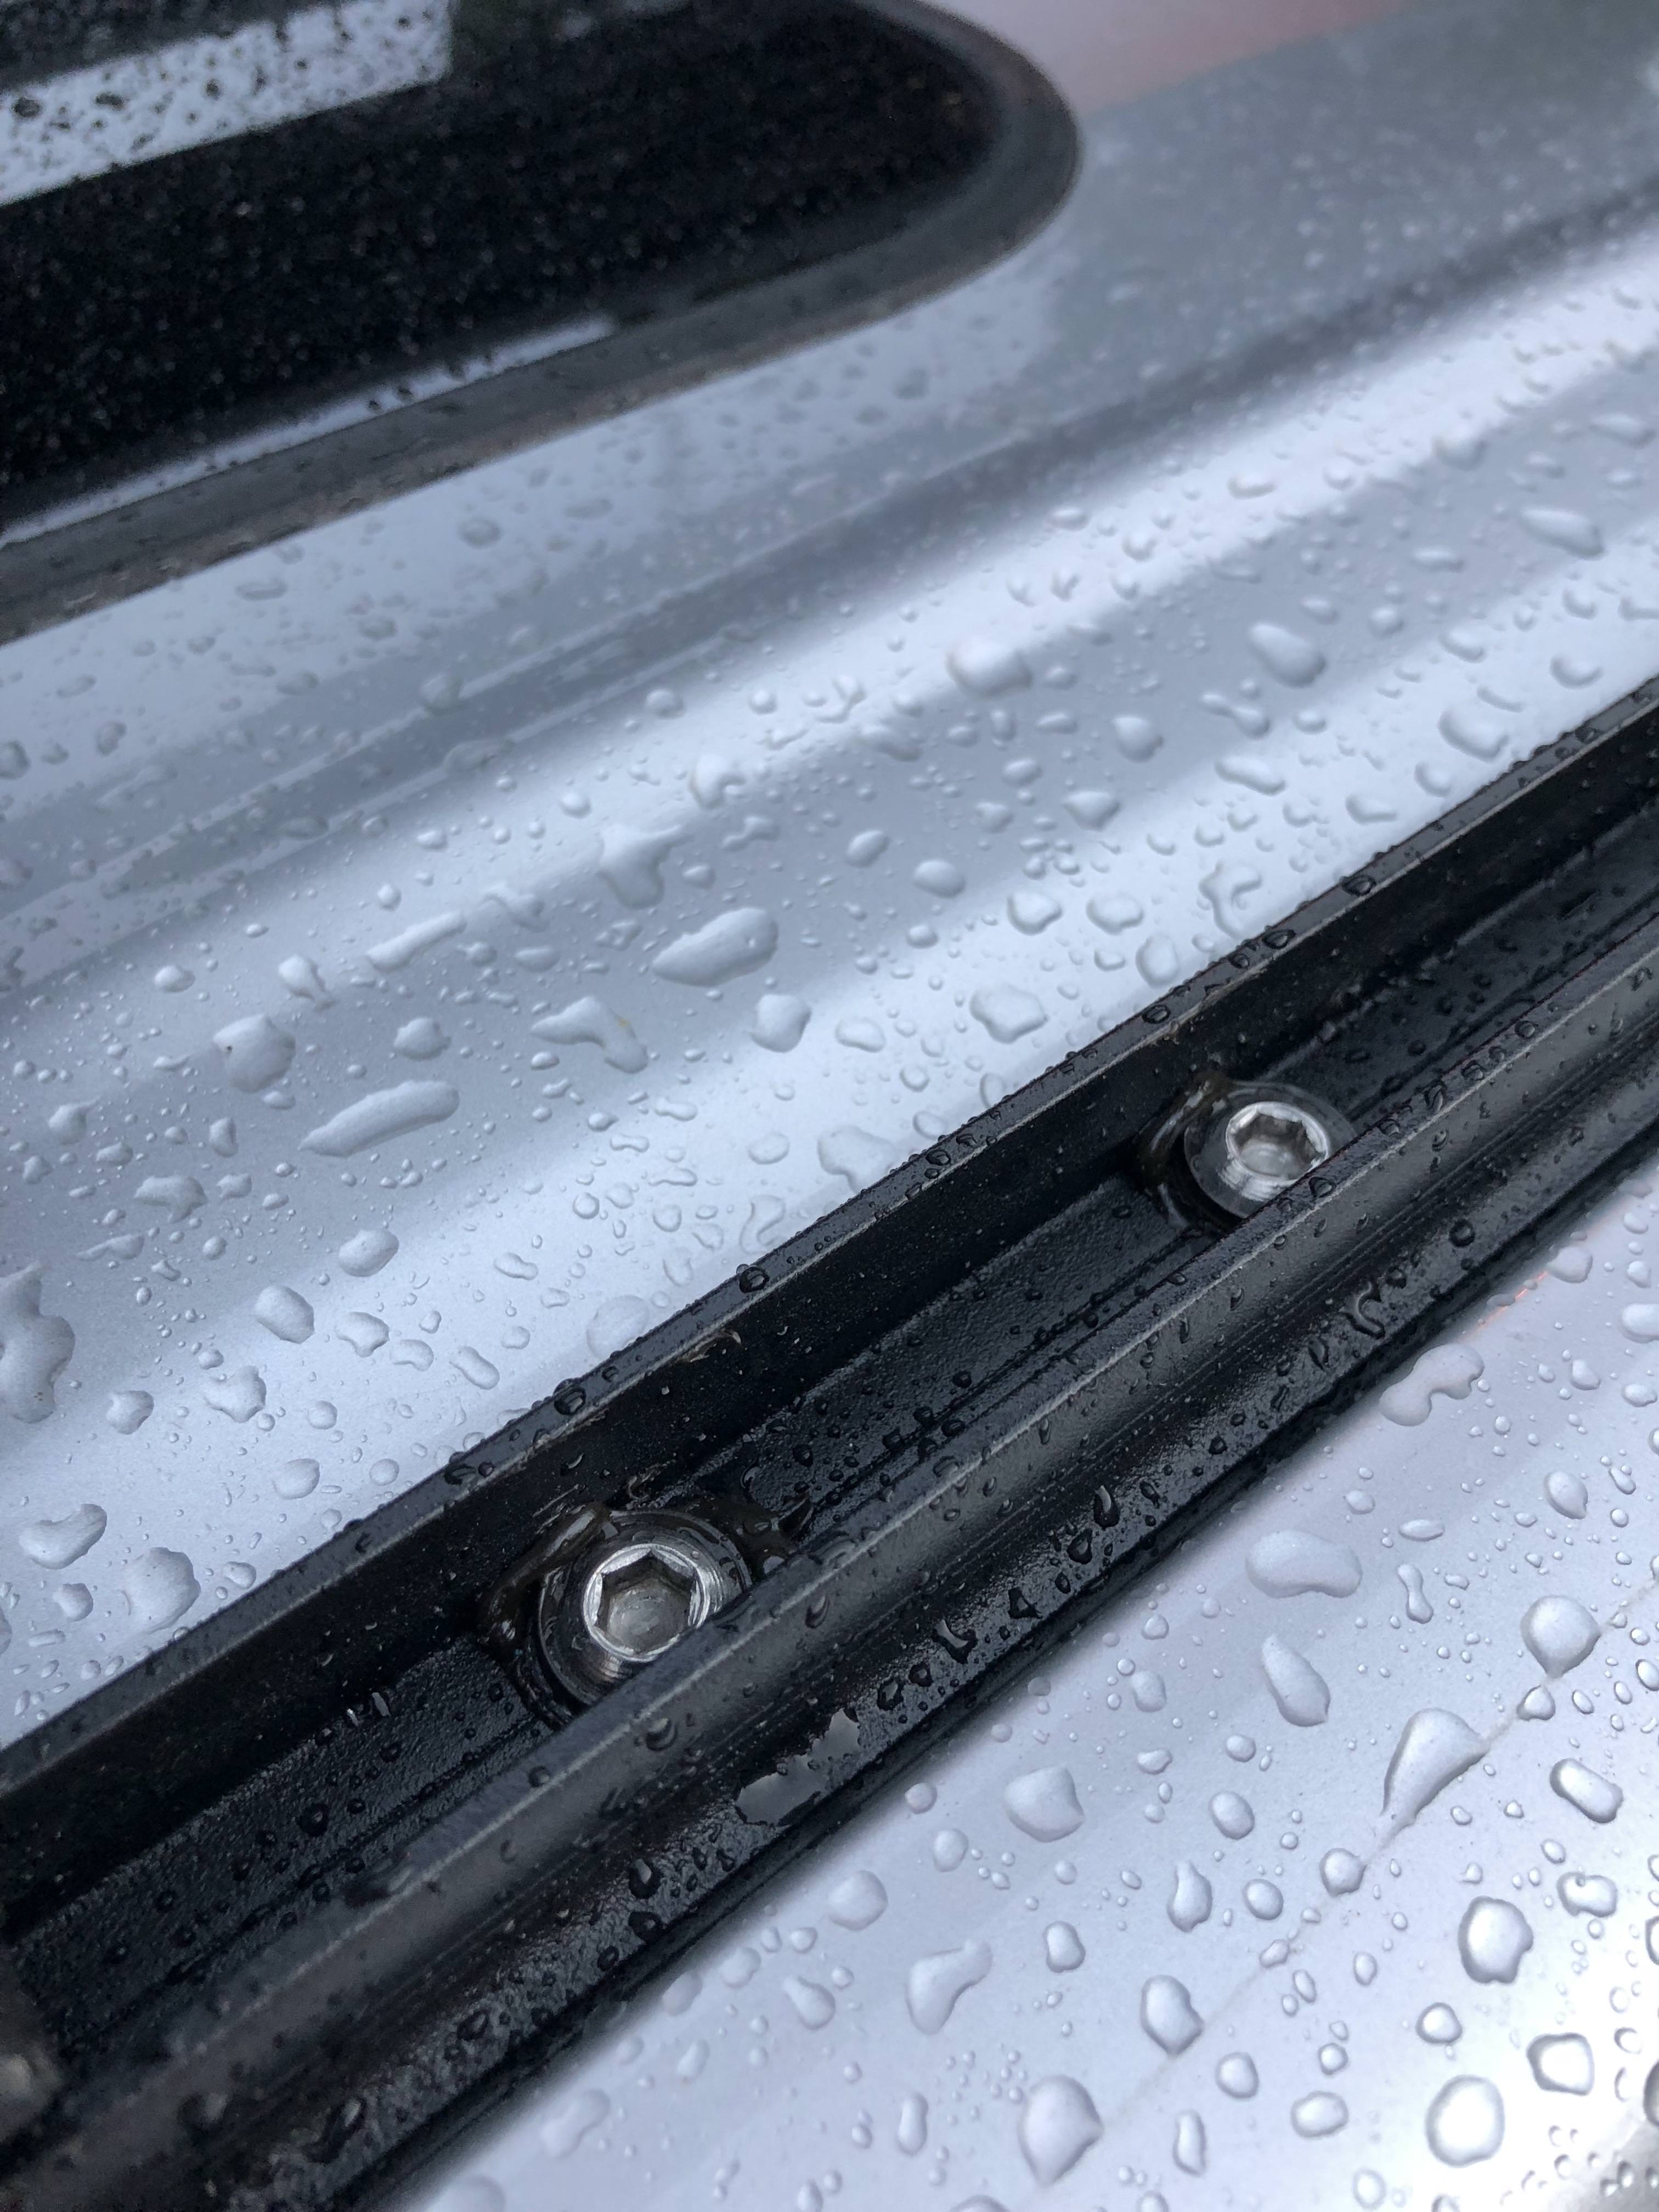 Should we worry about water leaks with an aftermarket roof rack? IH8MUD Forum